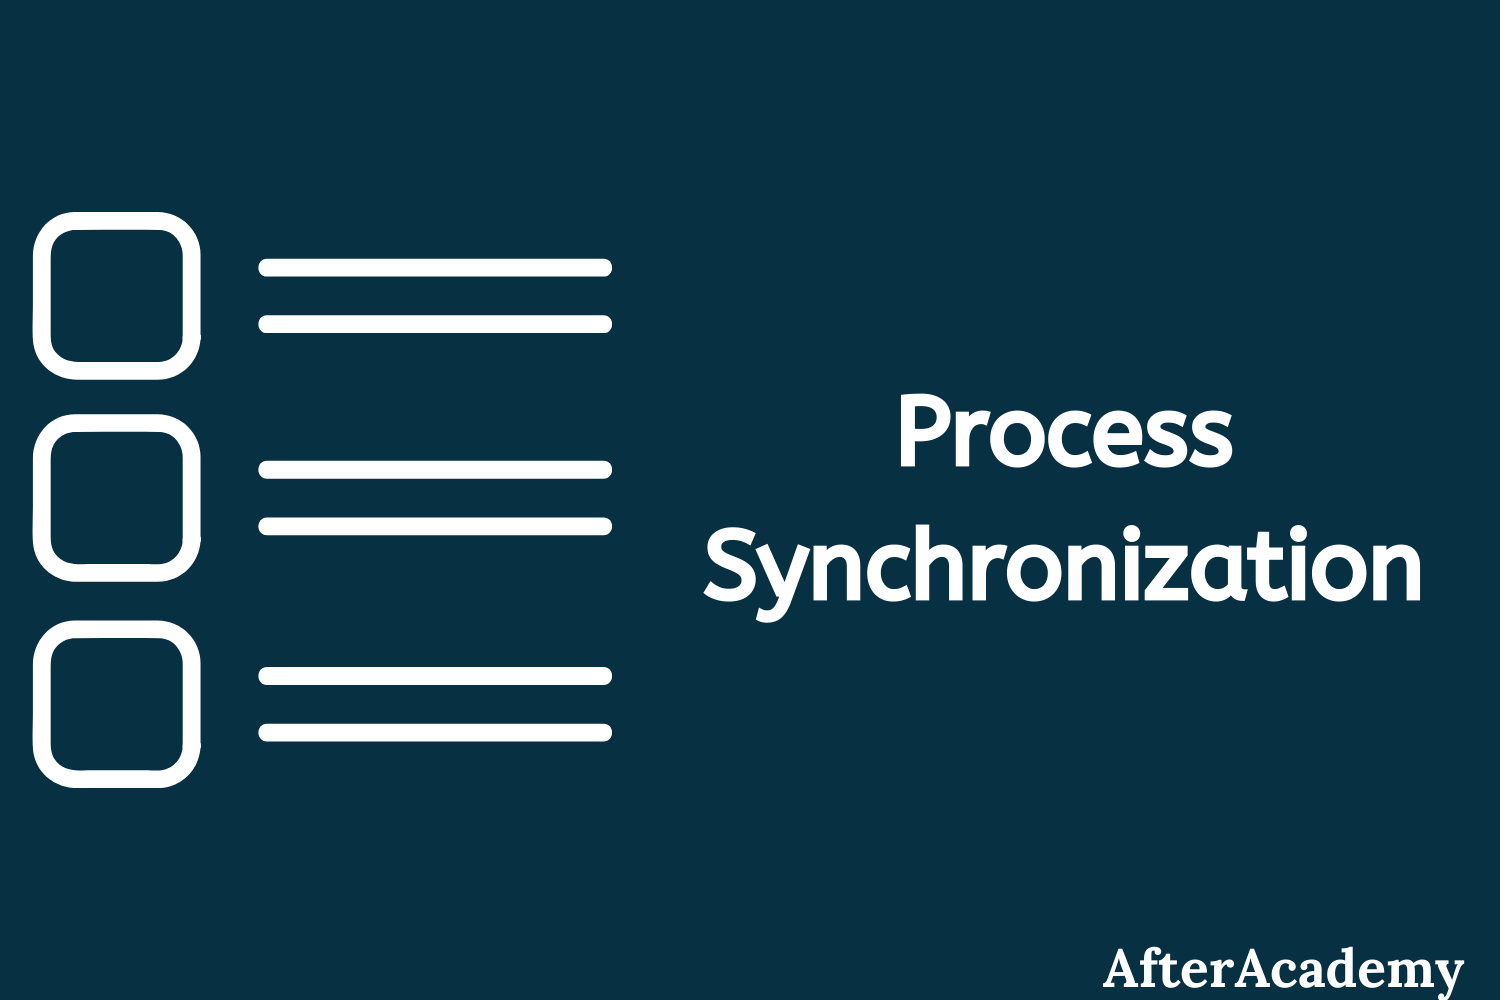 What is Process Synchronization in Operating System?